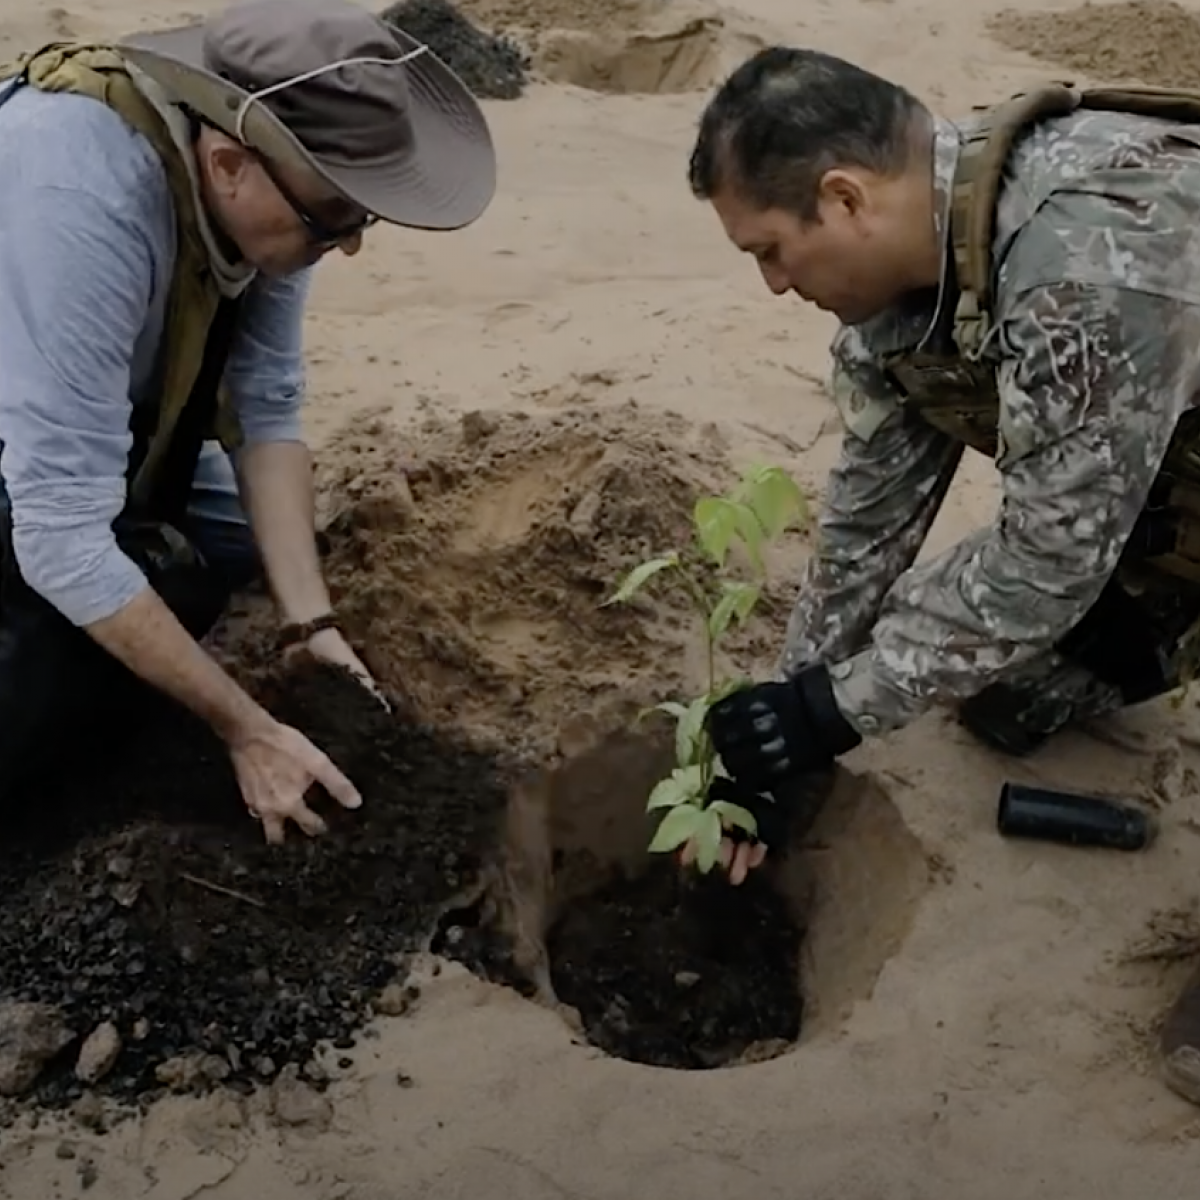 Two people planting a tree in deforested land